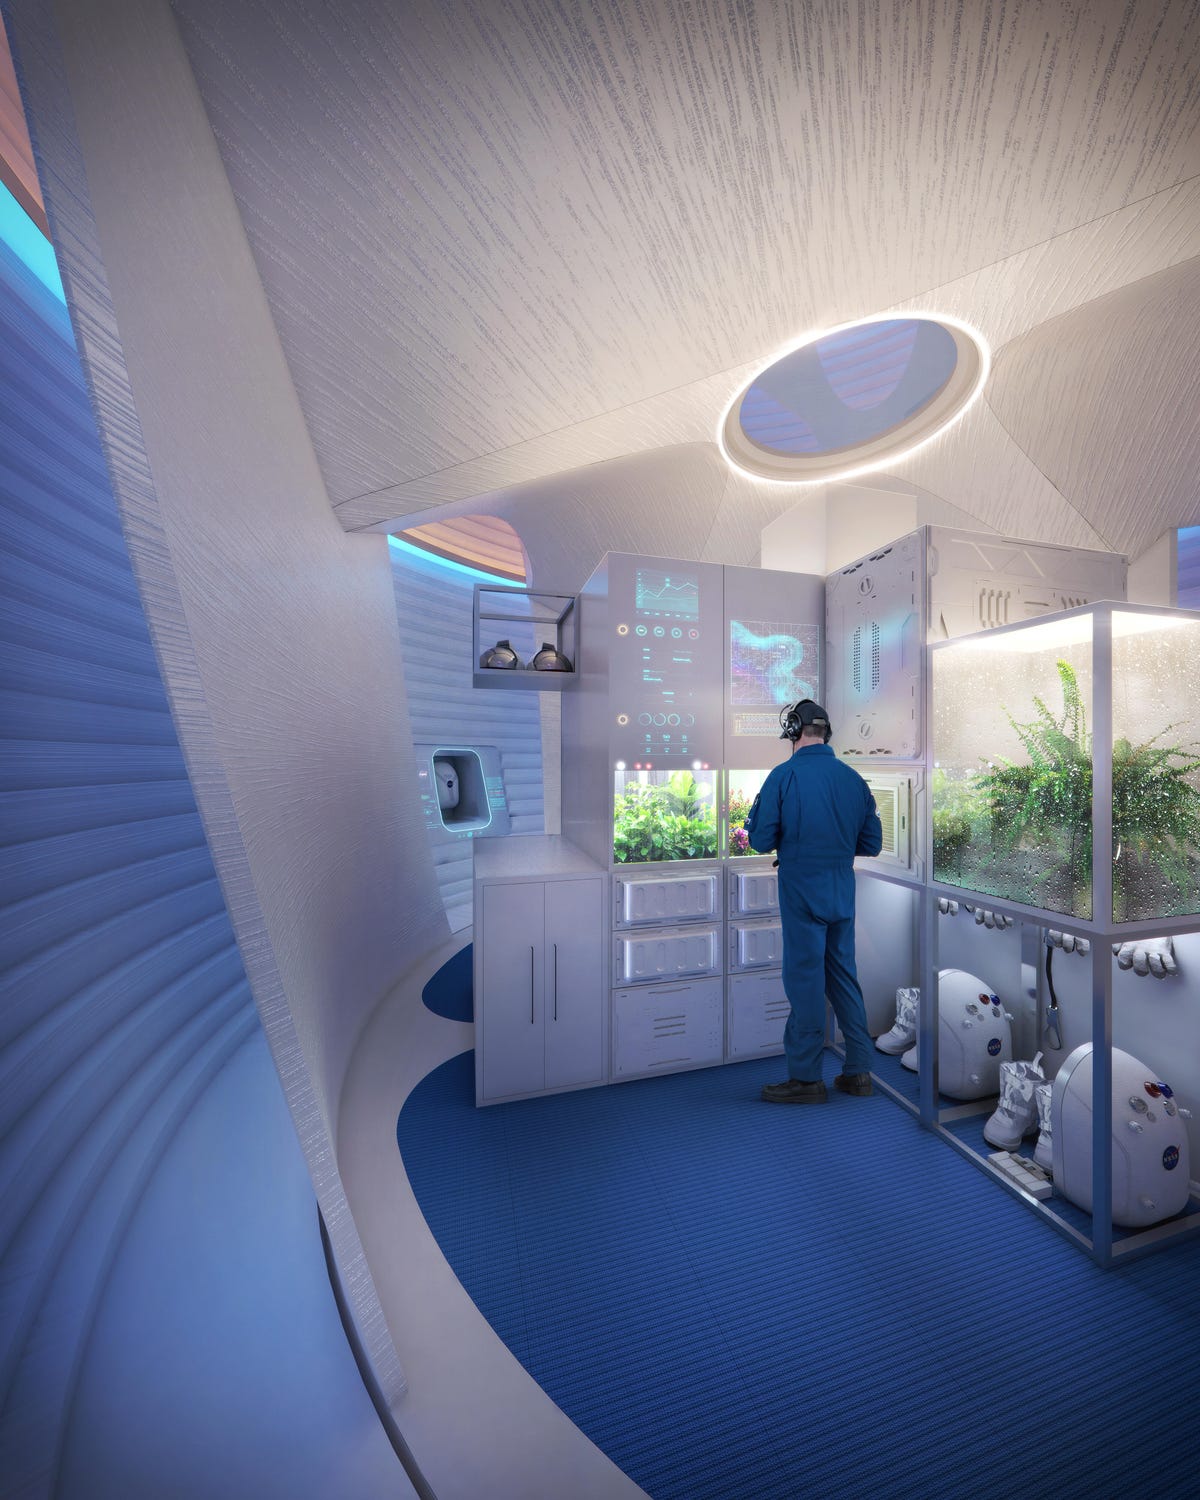 Marsha's double-walled structure also helps the habitat withstand the pressures of being in space. The Martian atmosphere outside is much thinner than the Earth-like atmosphere inside, so AI SpaceFactory had to design for internal air pressure. That double-walled design stops the habitat from expanding out like a balloon.